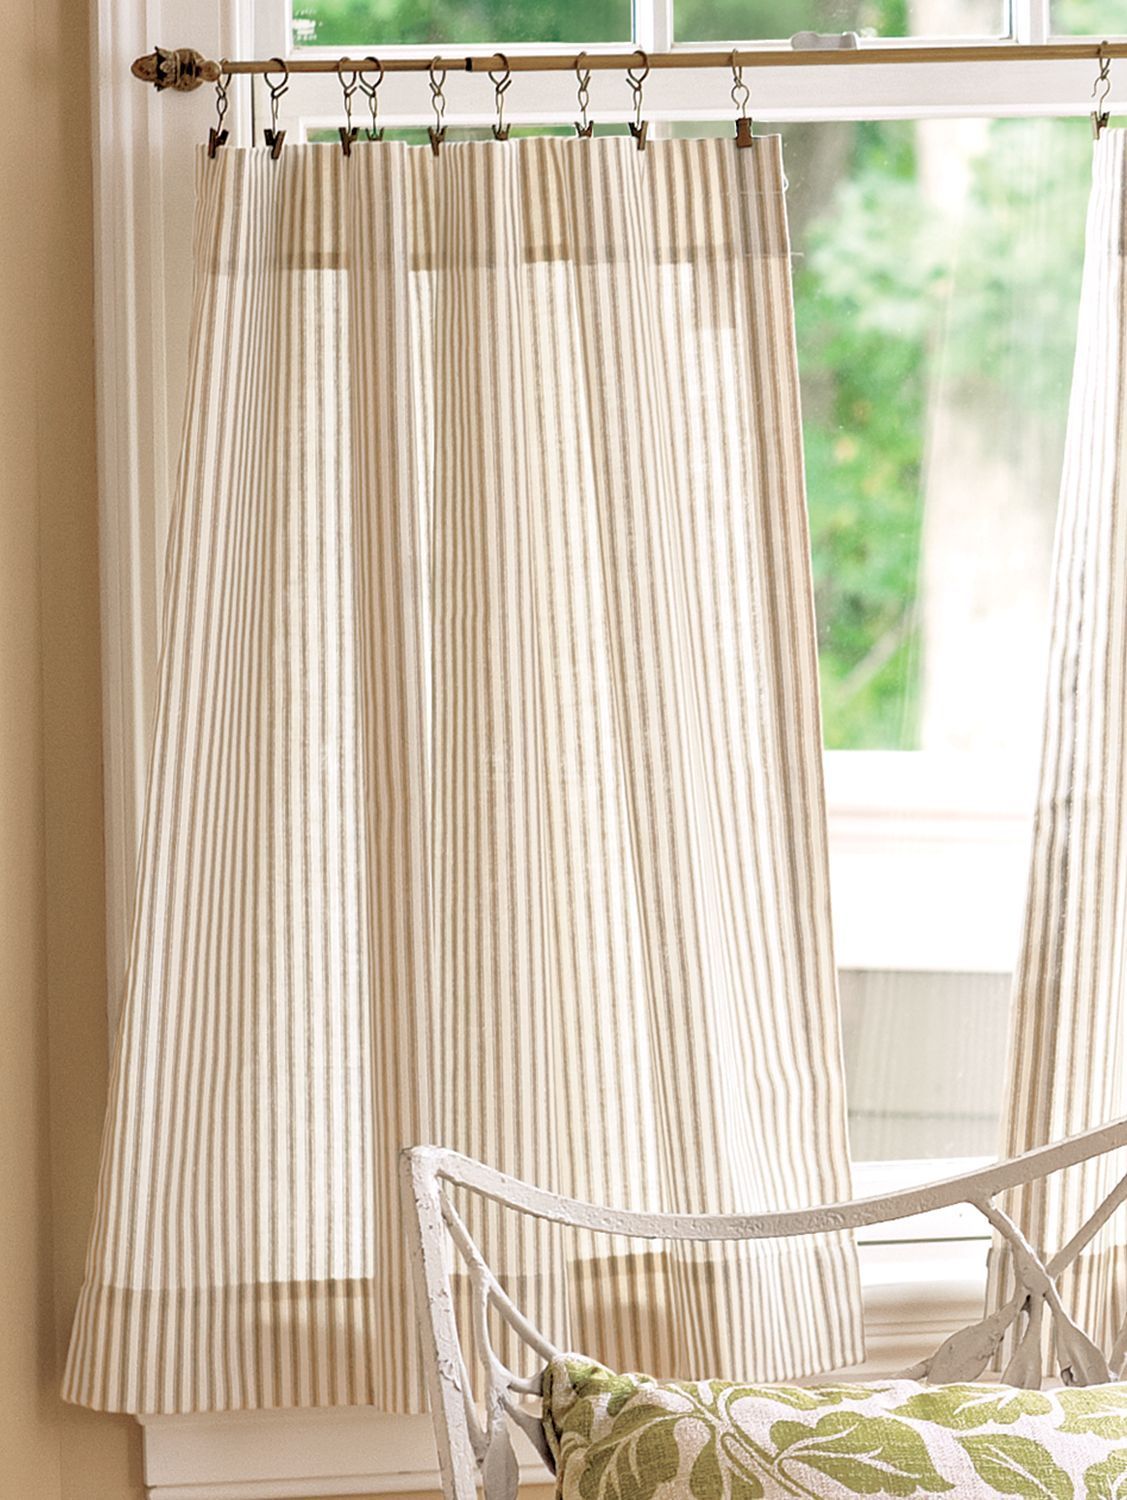 Ticking Stripe Rod Pocket Tiers In 2019 | Living Room Decor Pertaining To Rod Pocket Cotton Striped Lace Cotton Burlap Kitchen Curtains (View 10 of 20)